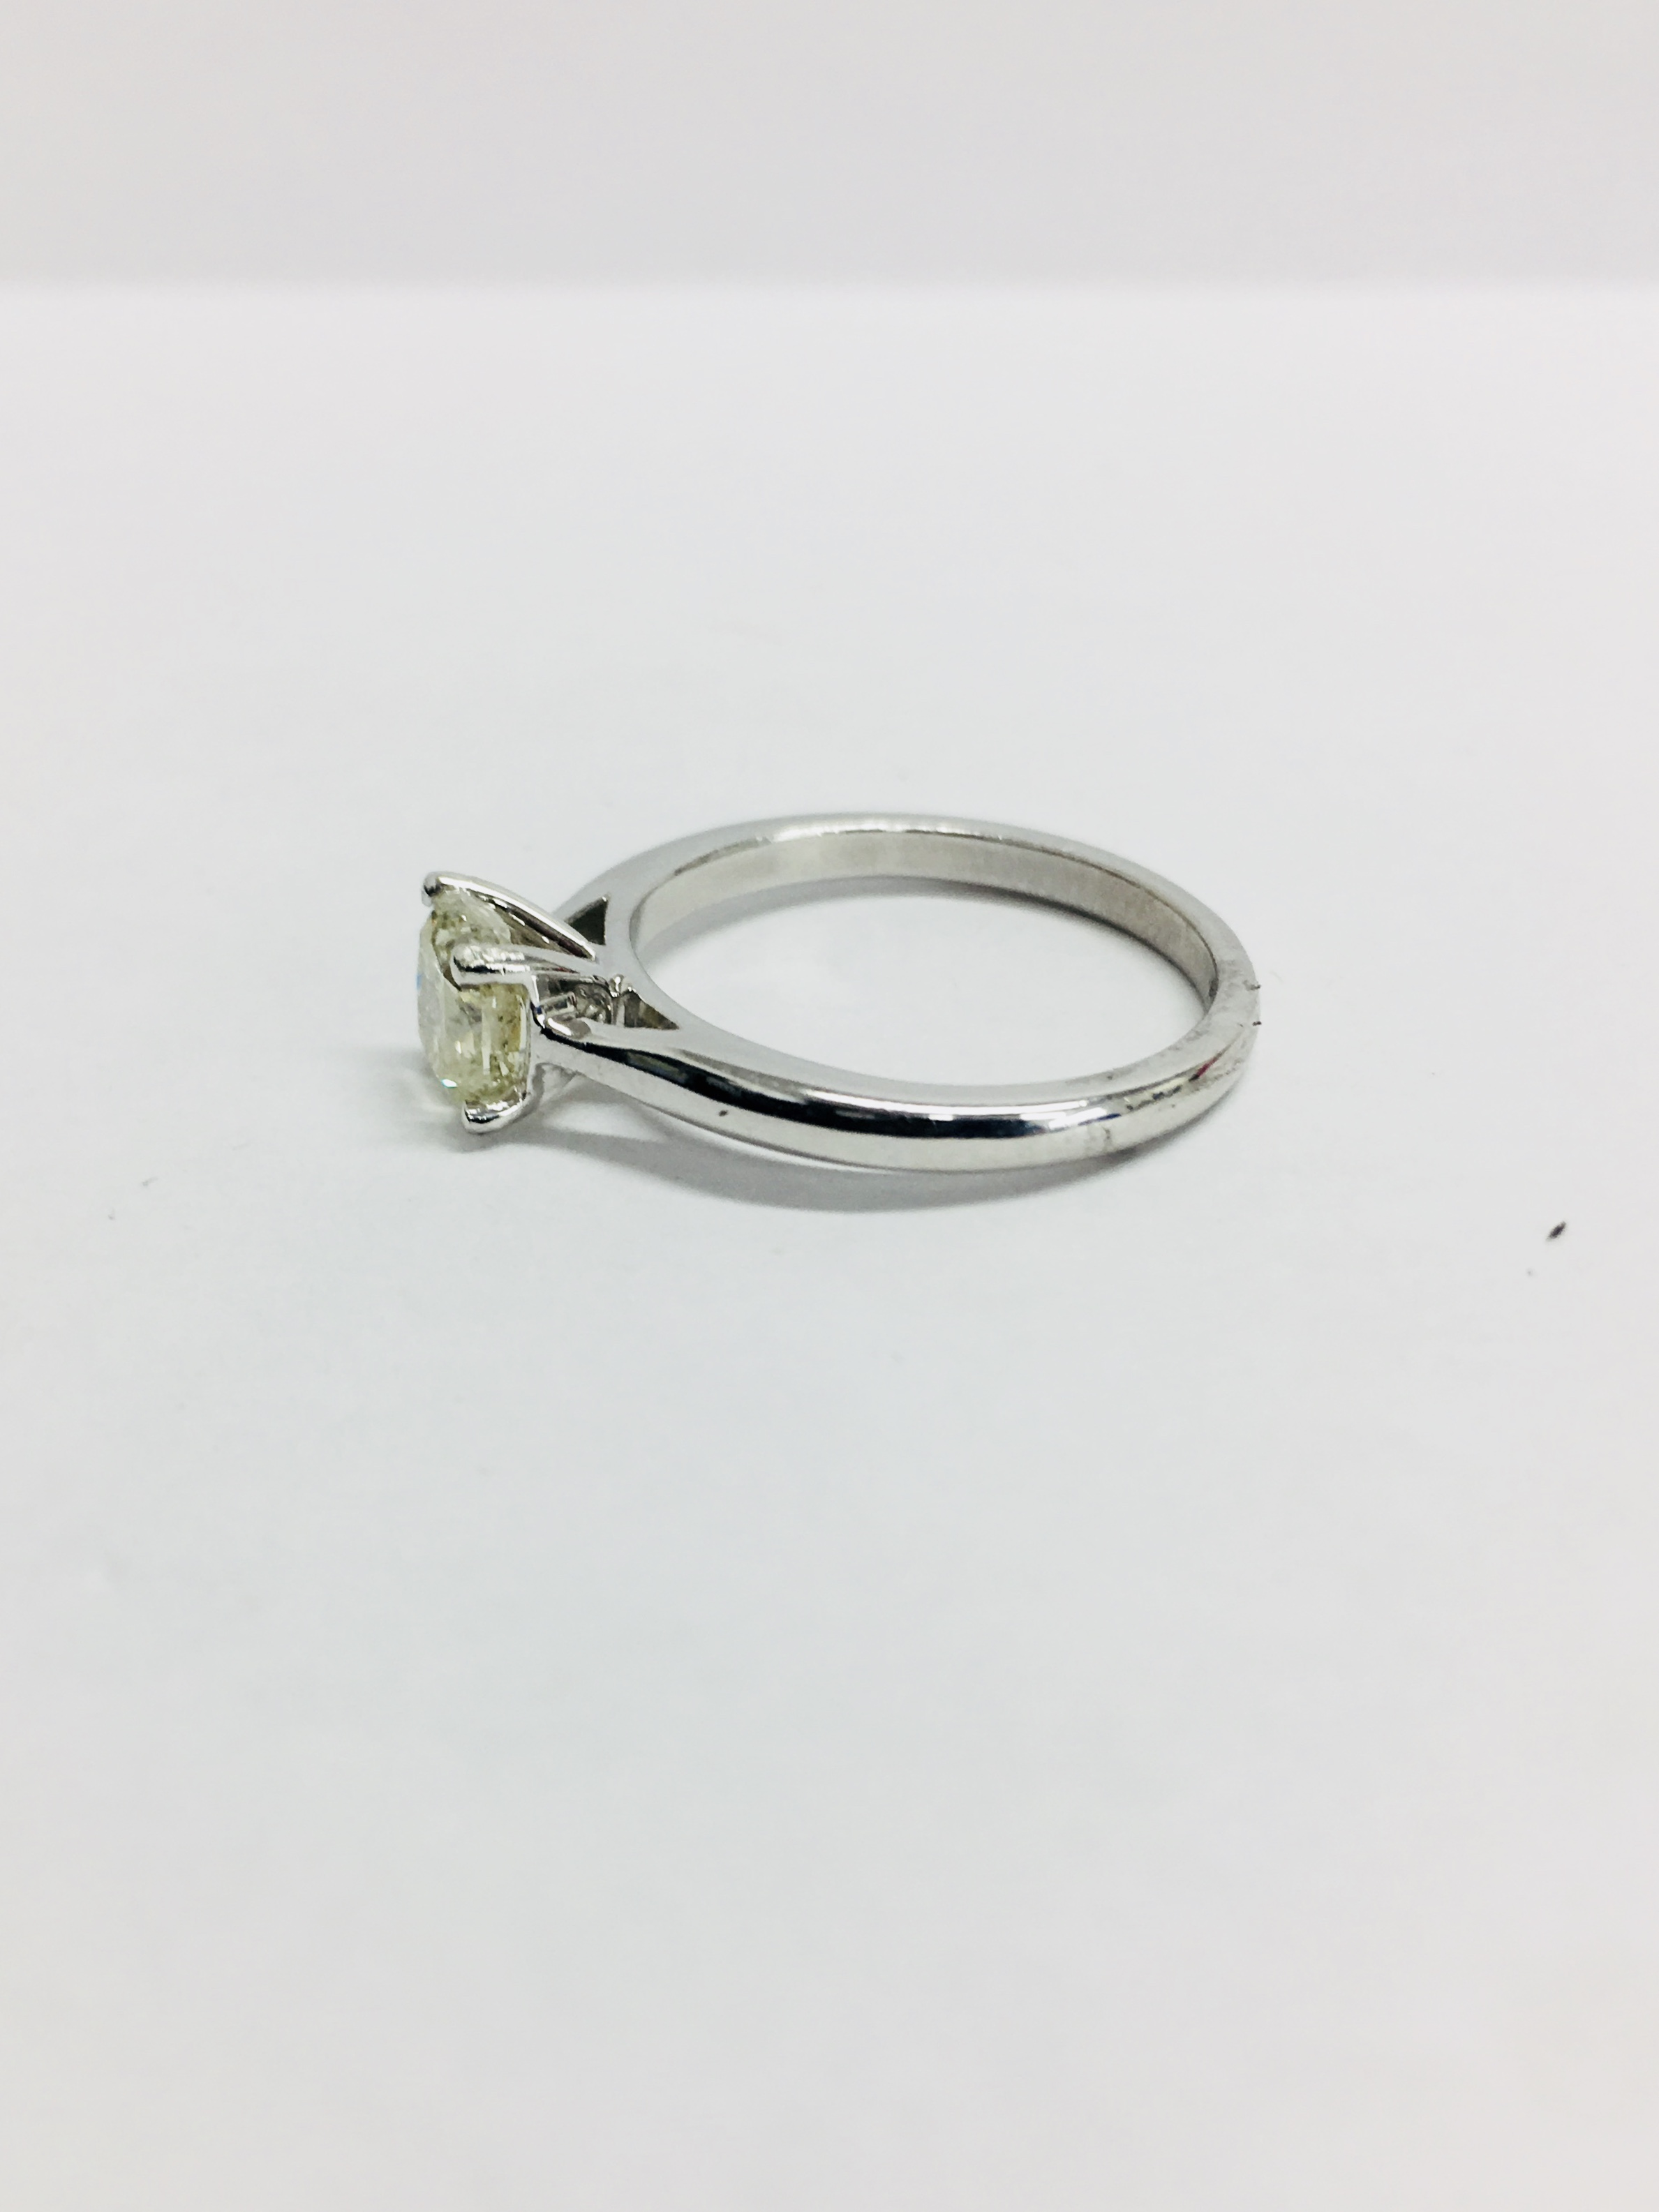 1Ct Fancy Yellow Cushion Cut Diamond Solitaire Ring, - Image 2 of 5